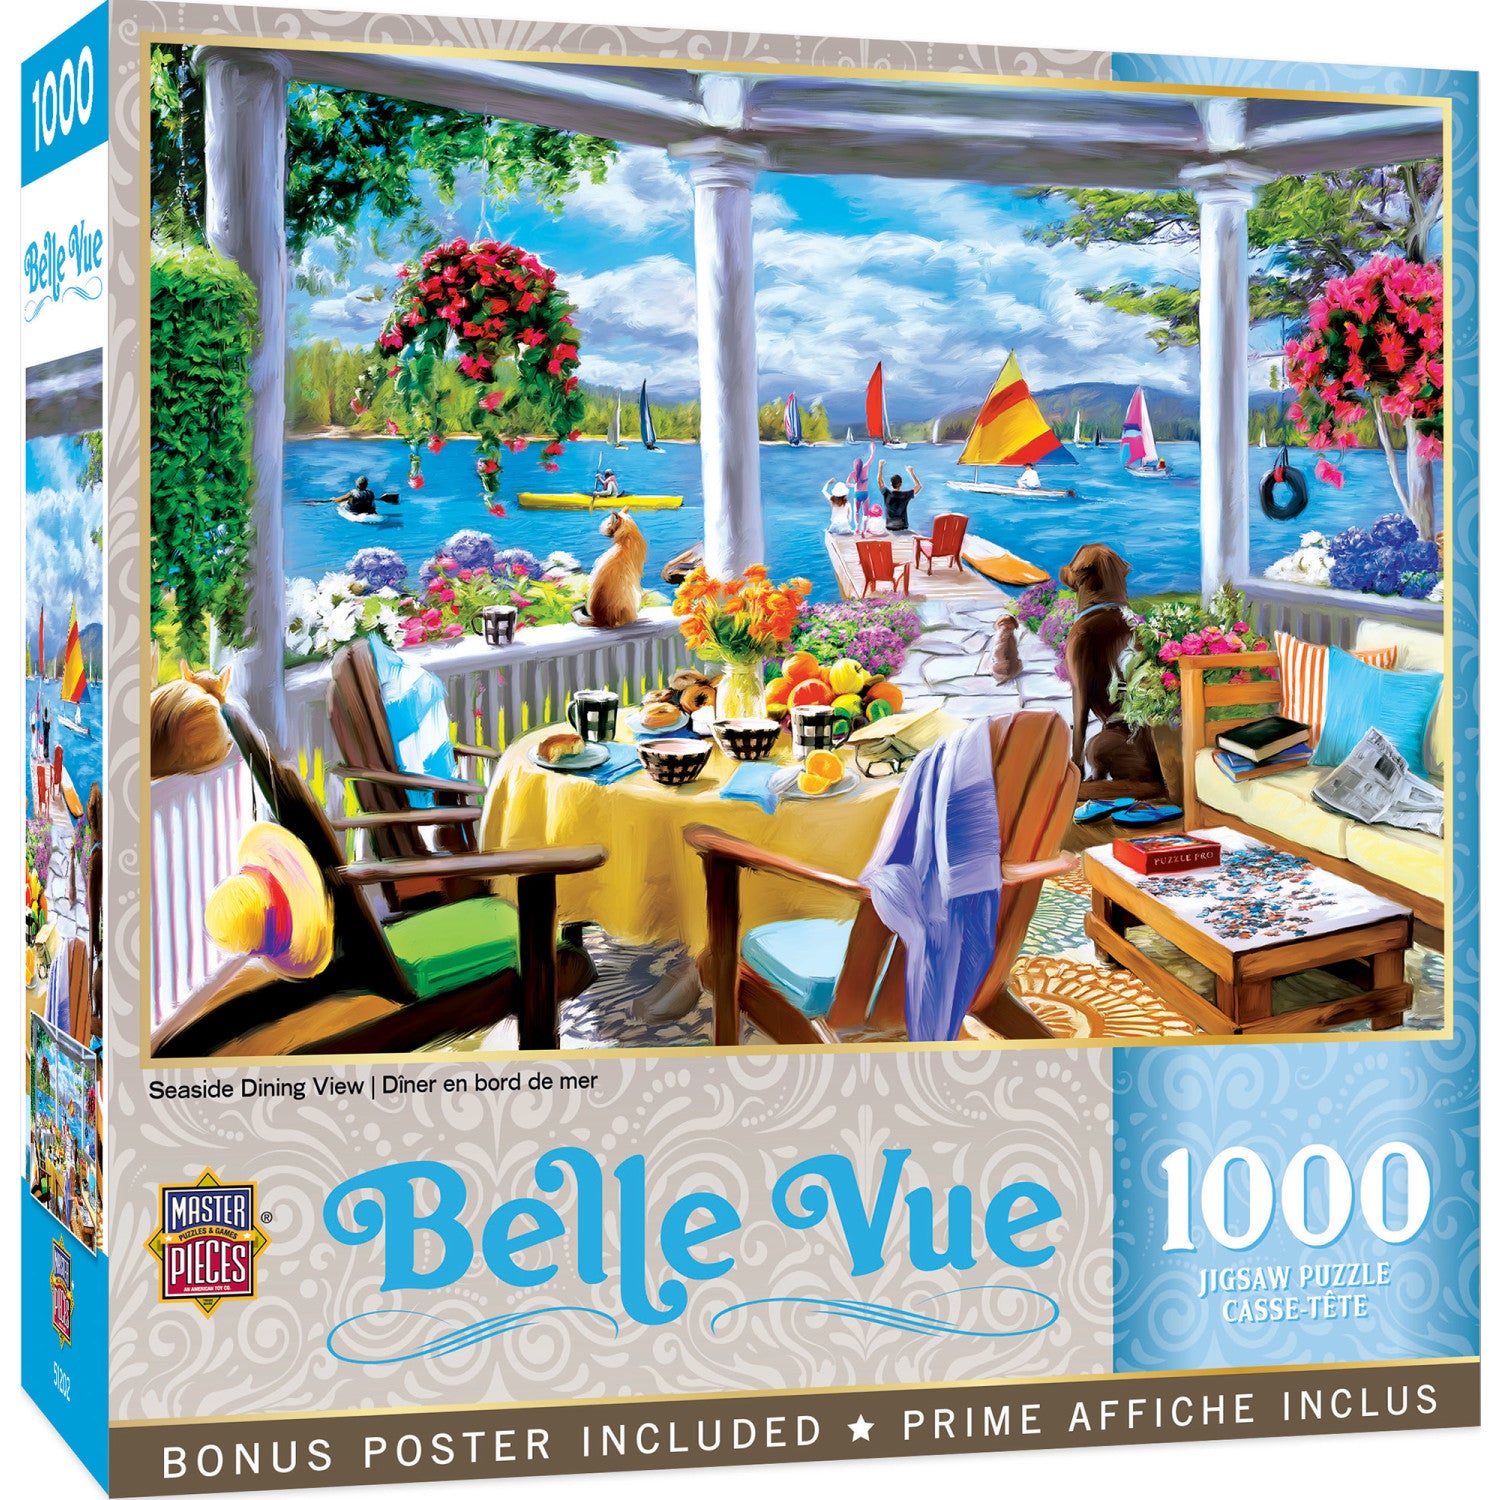 Belle Vue - Seaside Dining View 1000 Piece Jigsaw Puzzle